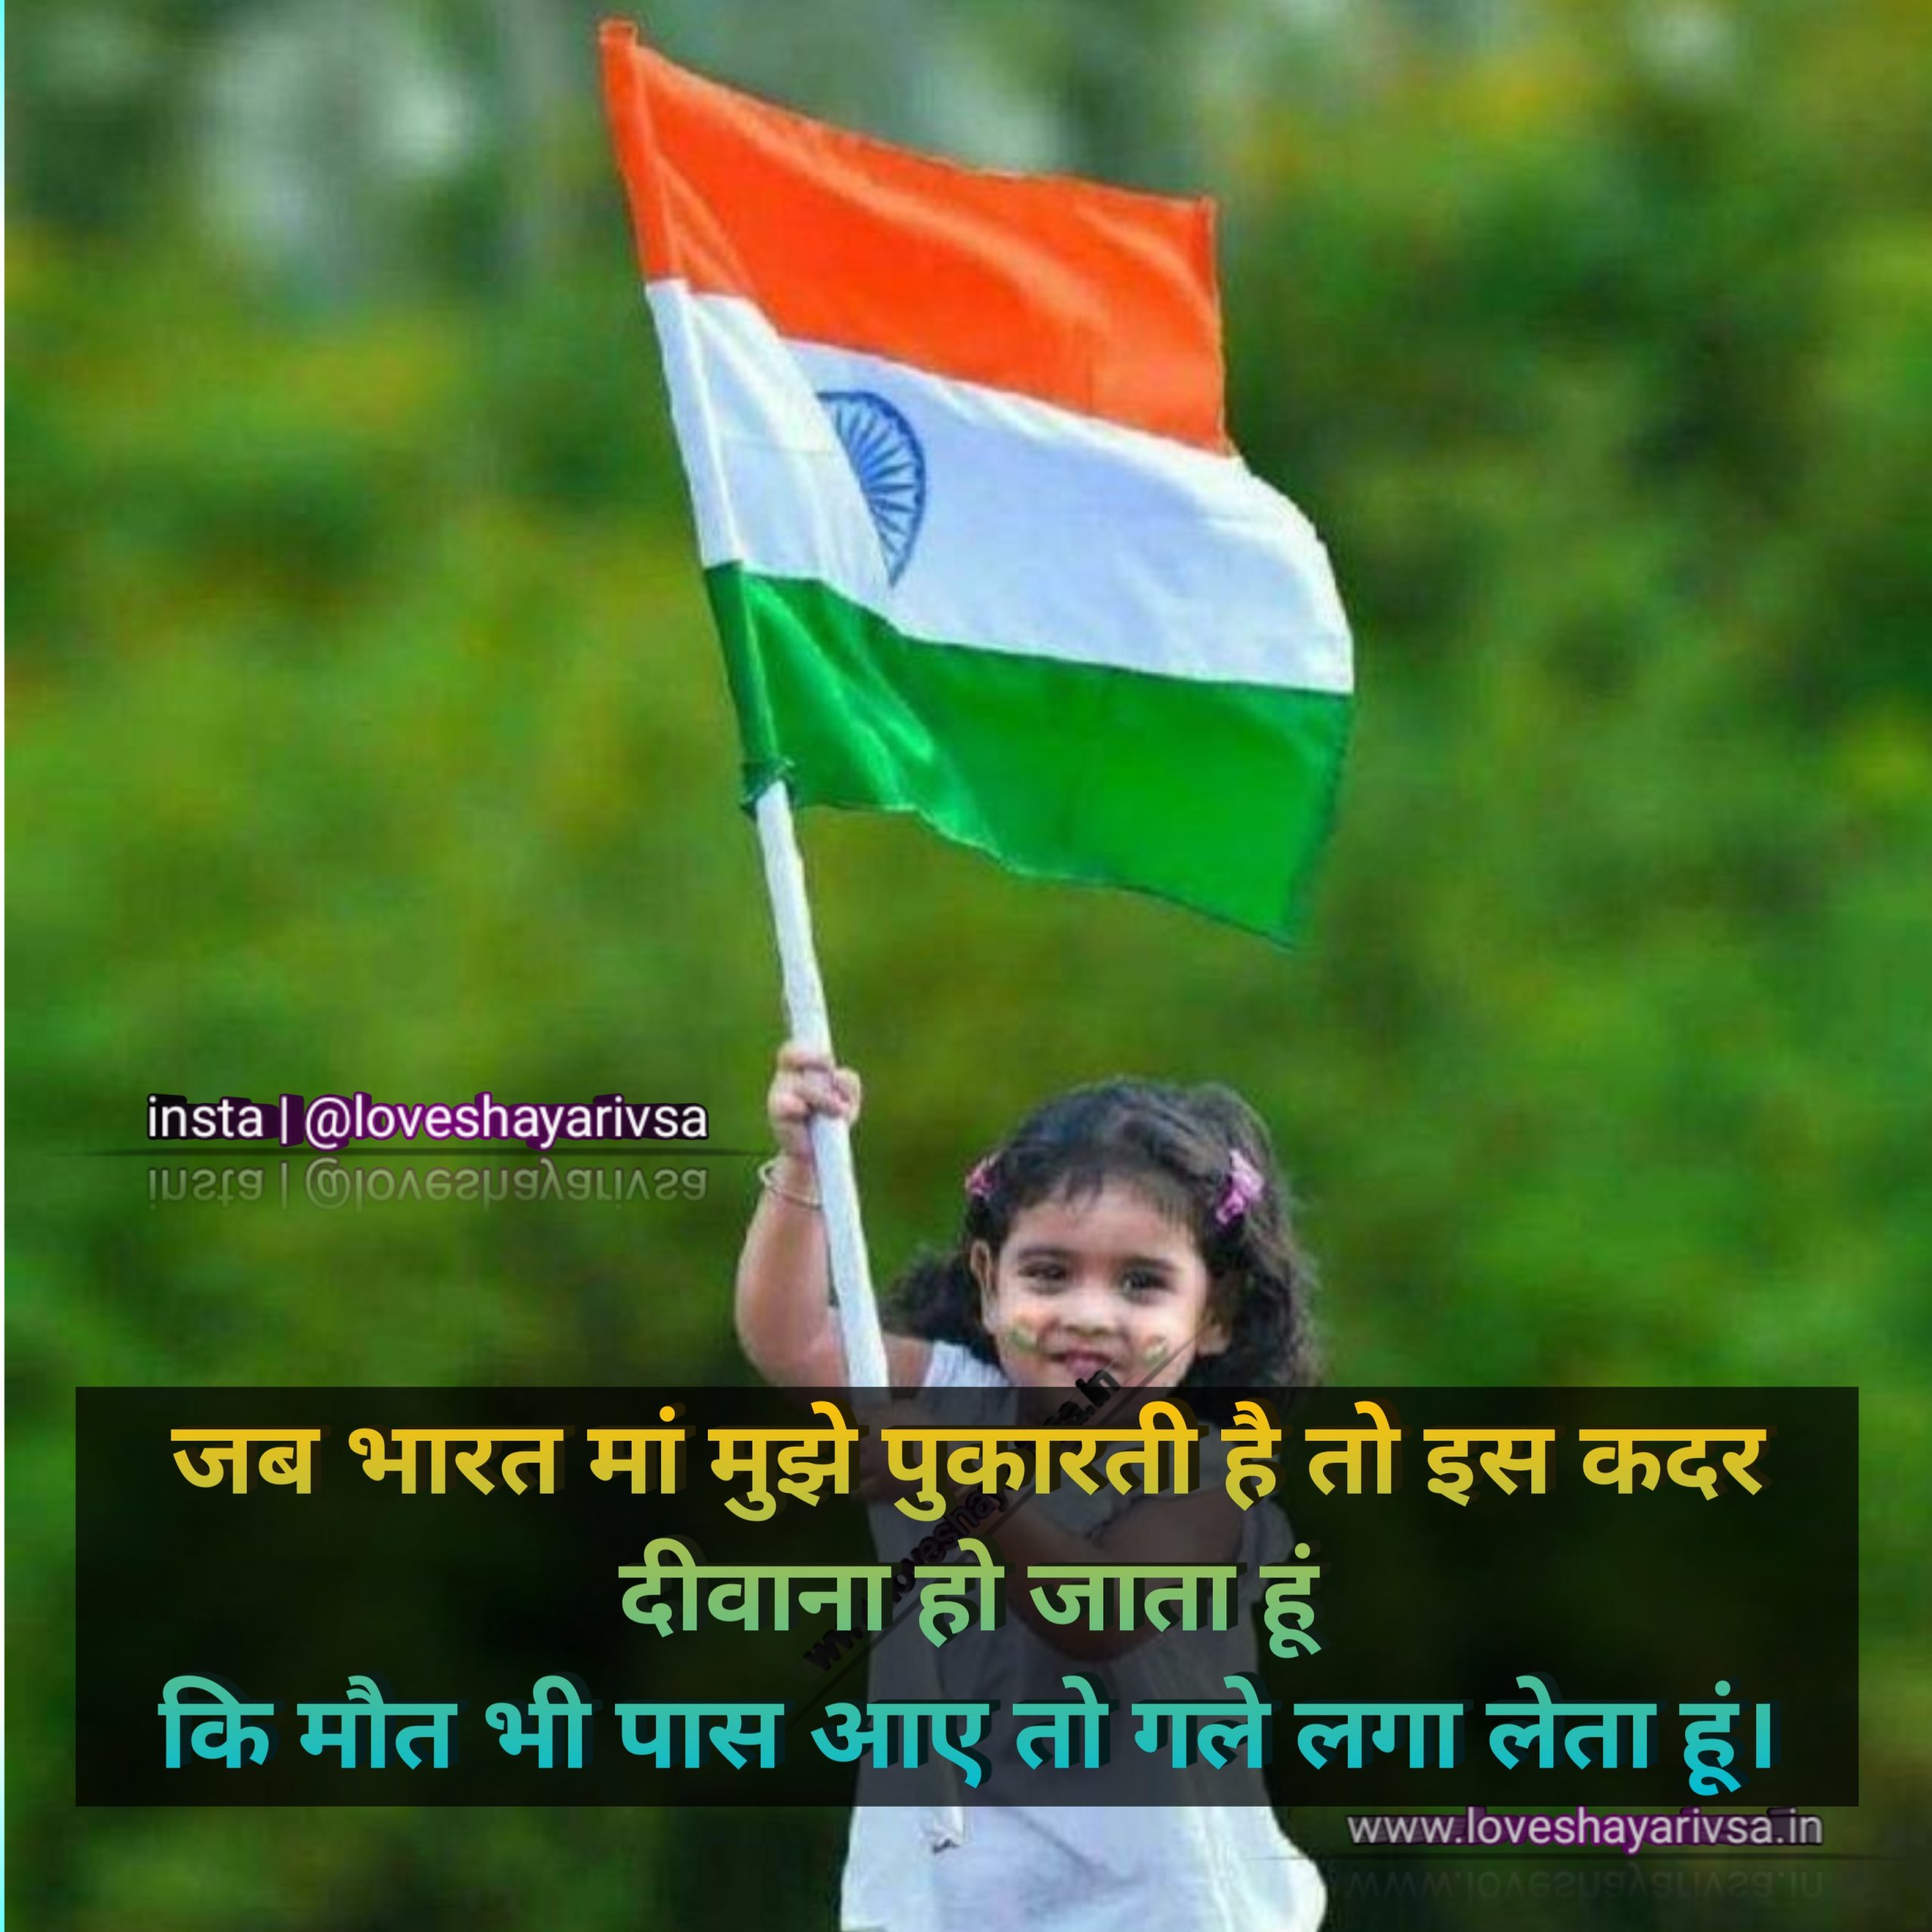 "A Young girl Wrapped in the Tricolor, Standing Tall as a Symbol of India's Bright Future and Aspirations on Independence Day 🇮🇳✨ #PatrioticYouth #FutureLeaders"